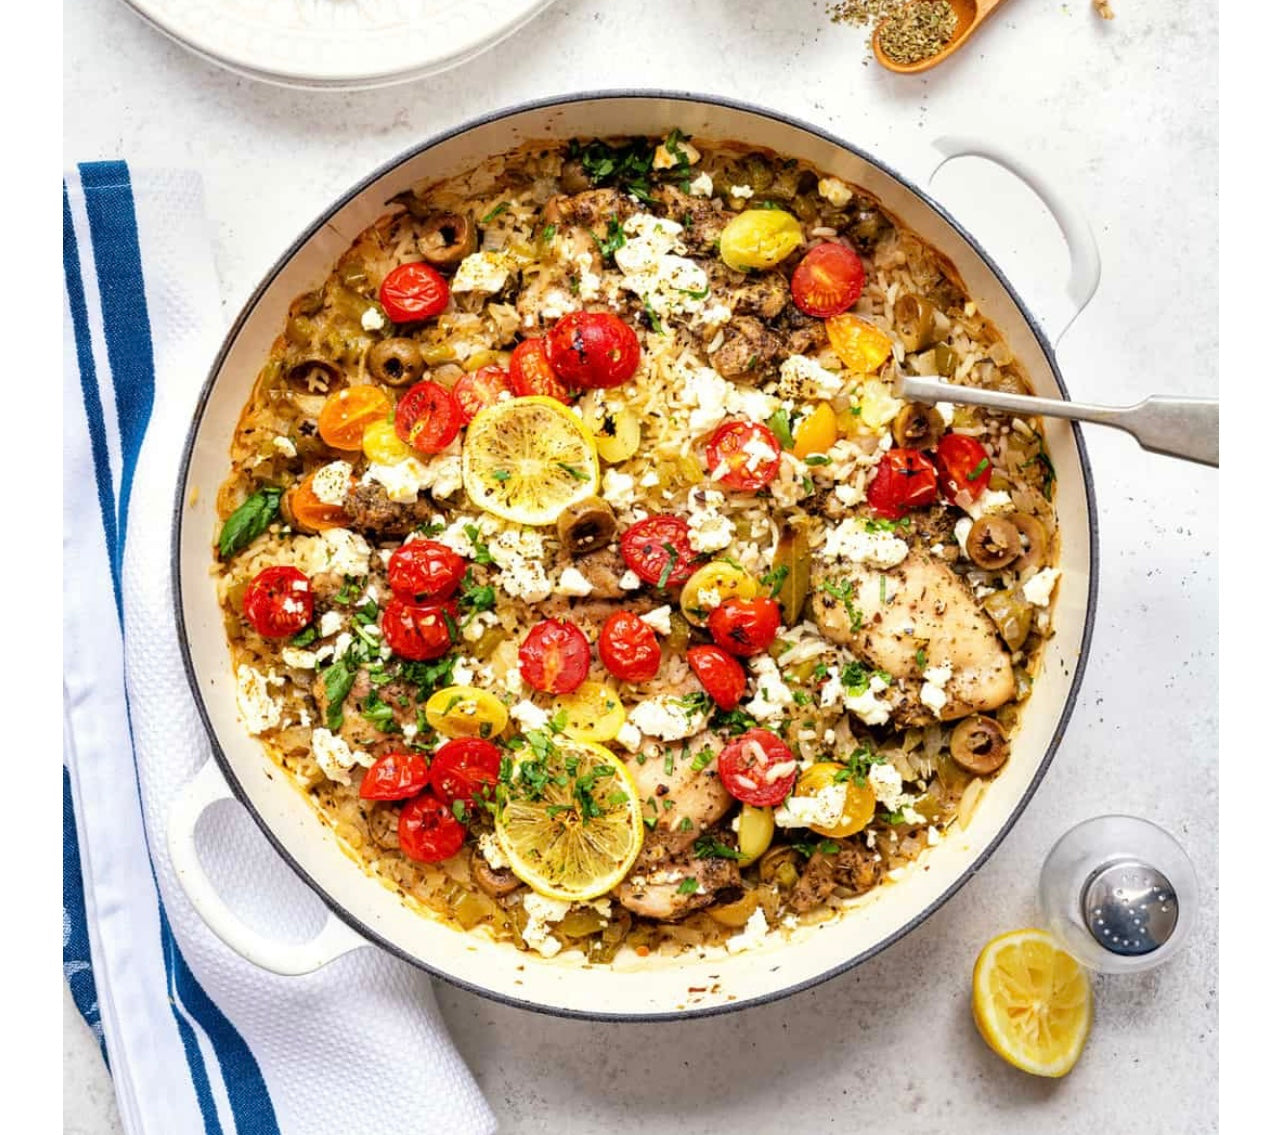 Chicken and cherry tomatoes with rice